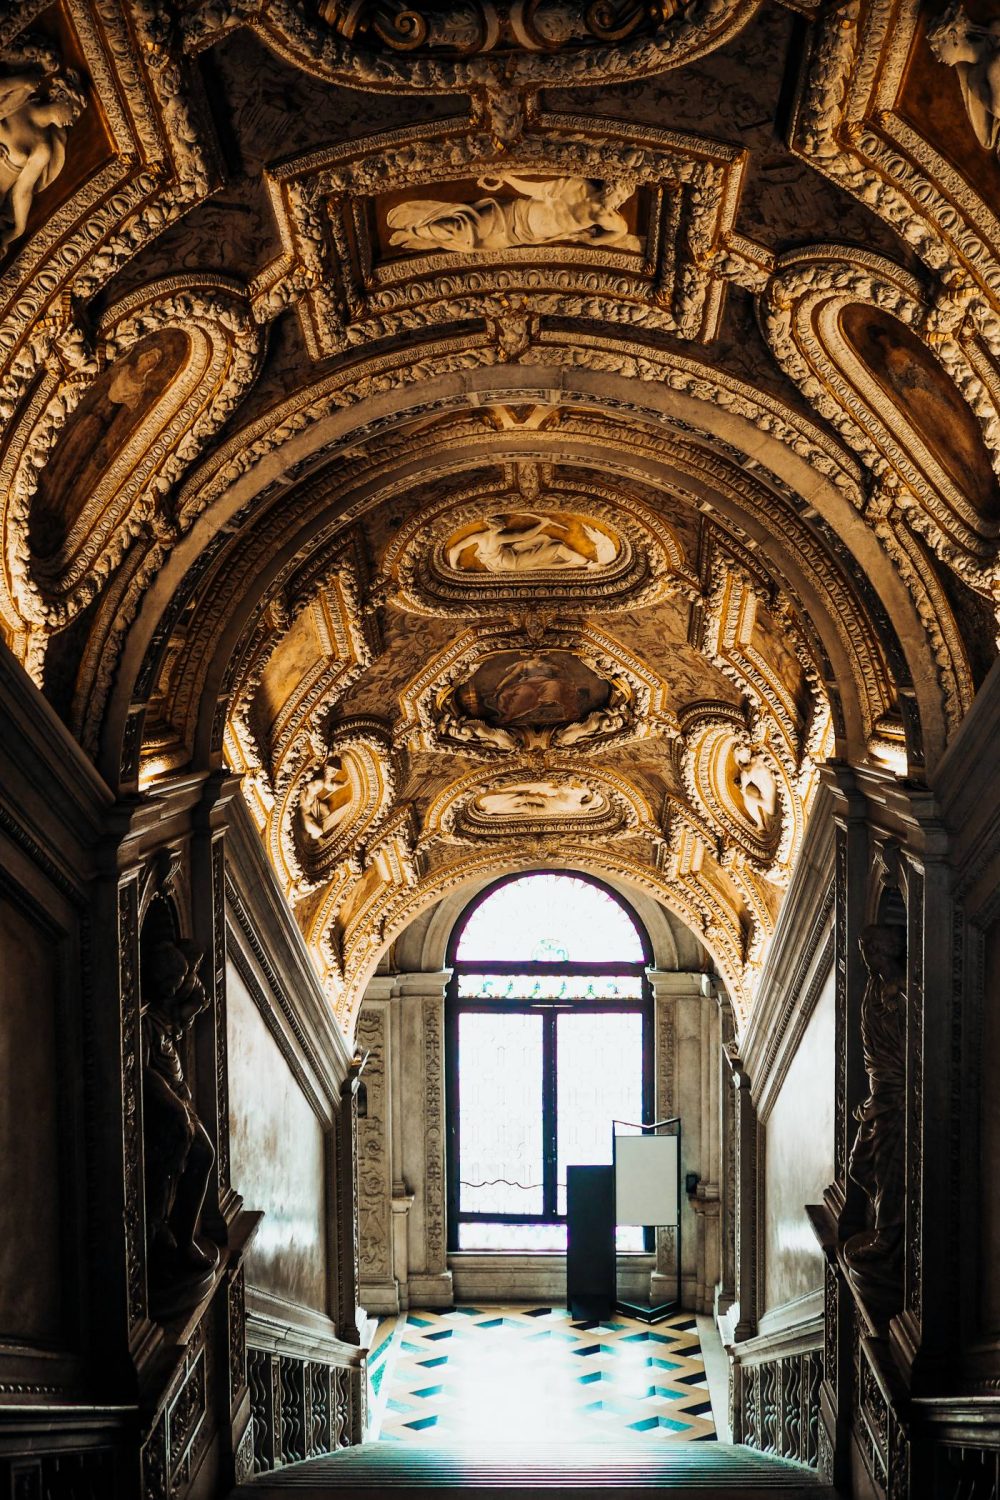 The Golden Staircase in Palazzo Ducale